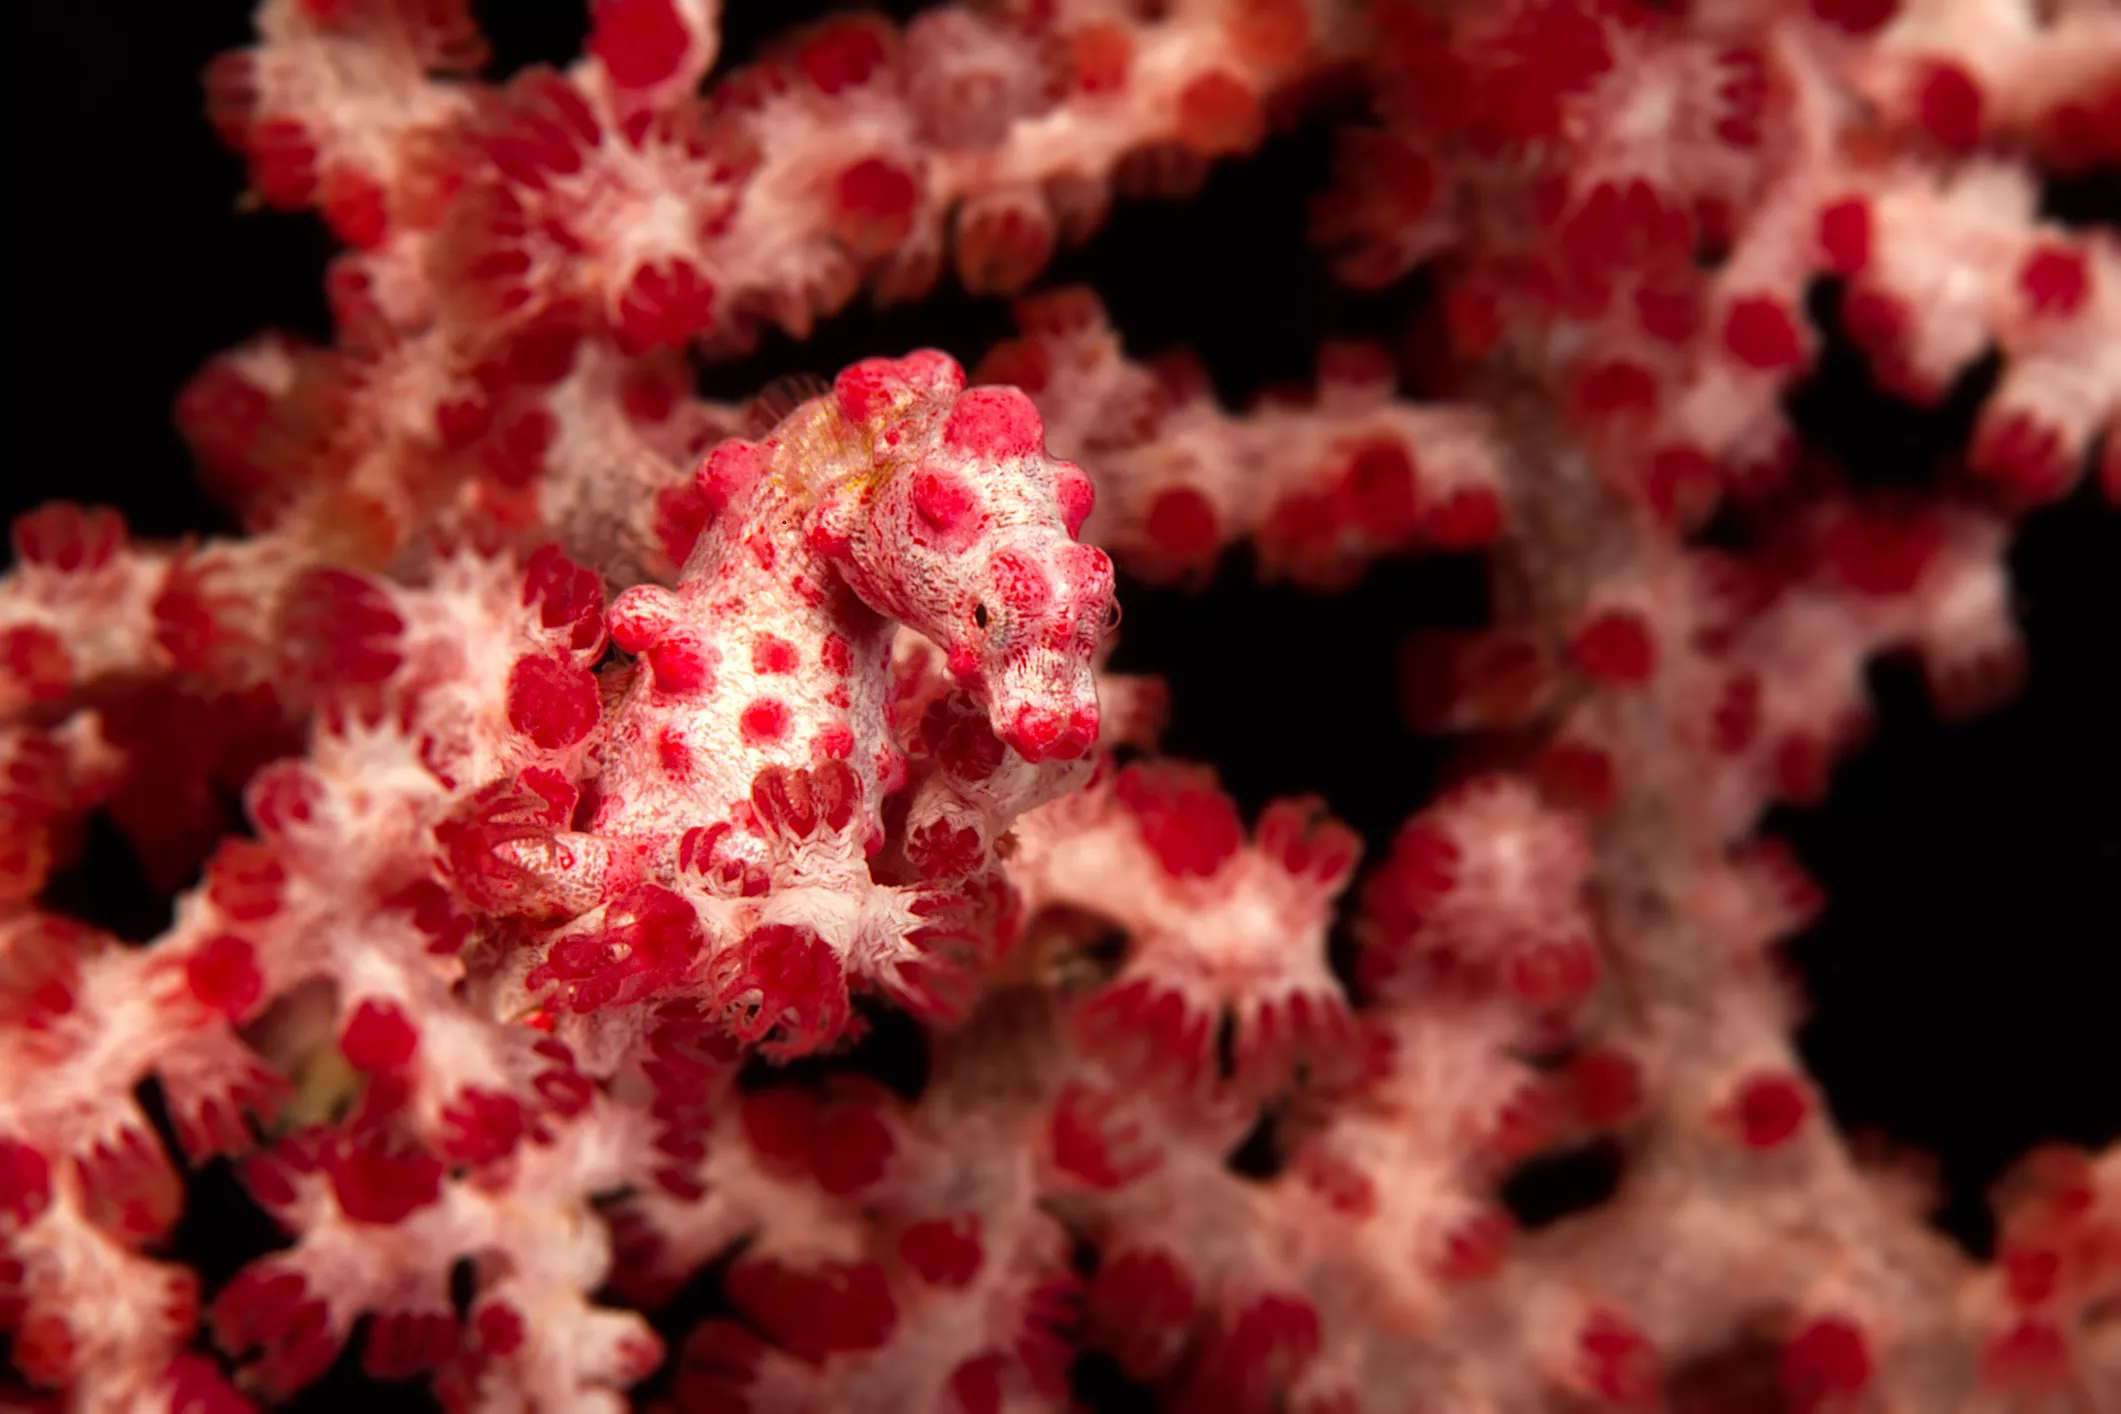 A pink and white seahorse blends into the coral in the background